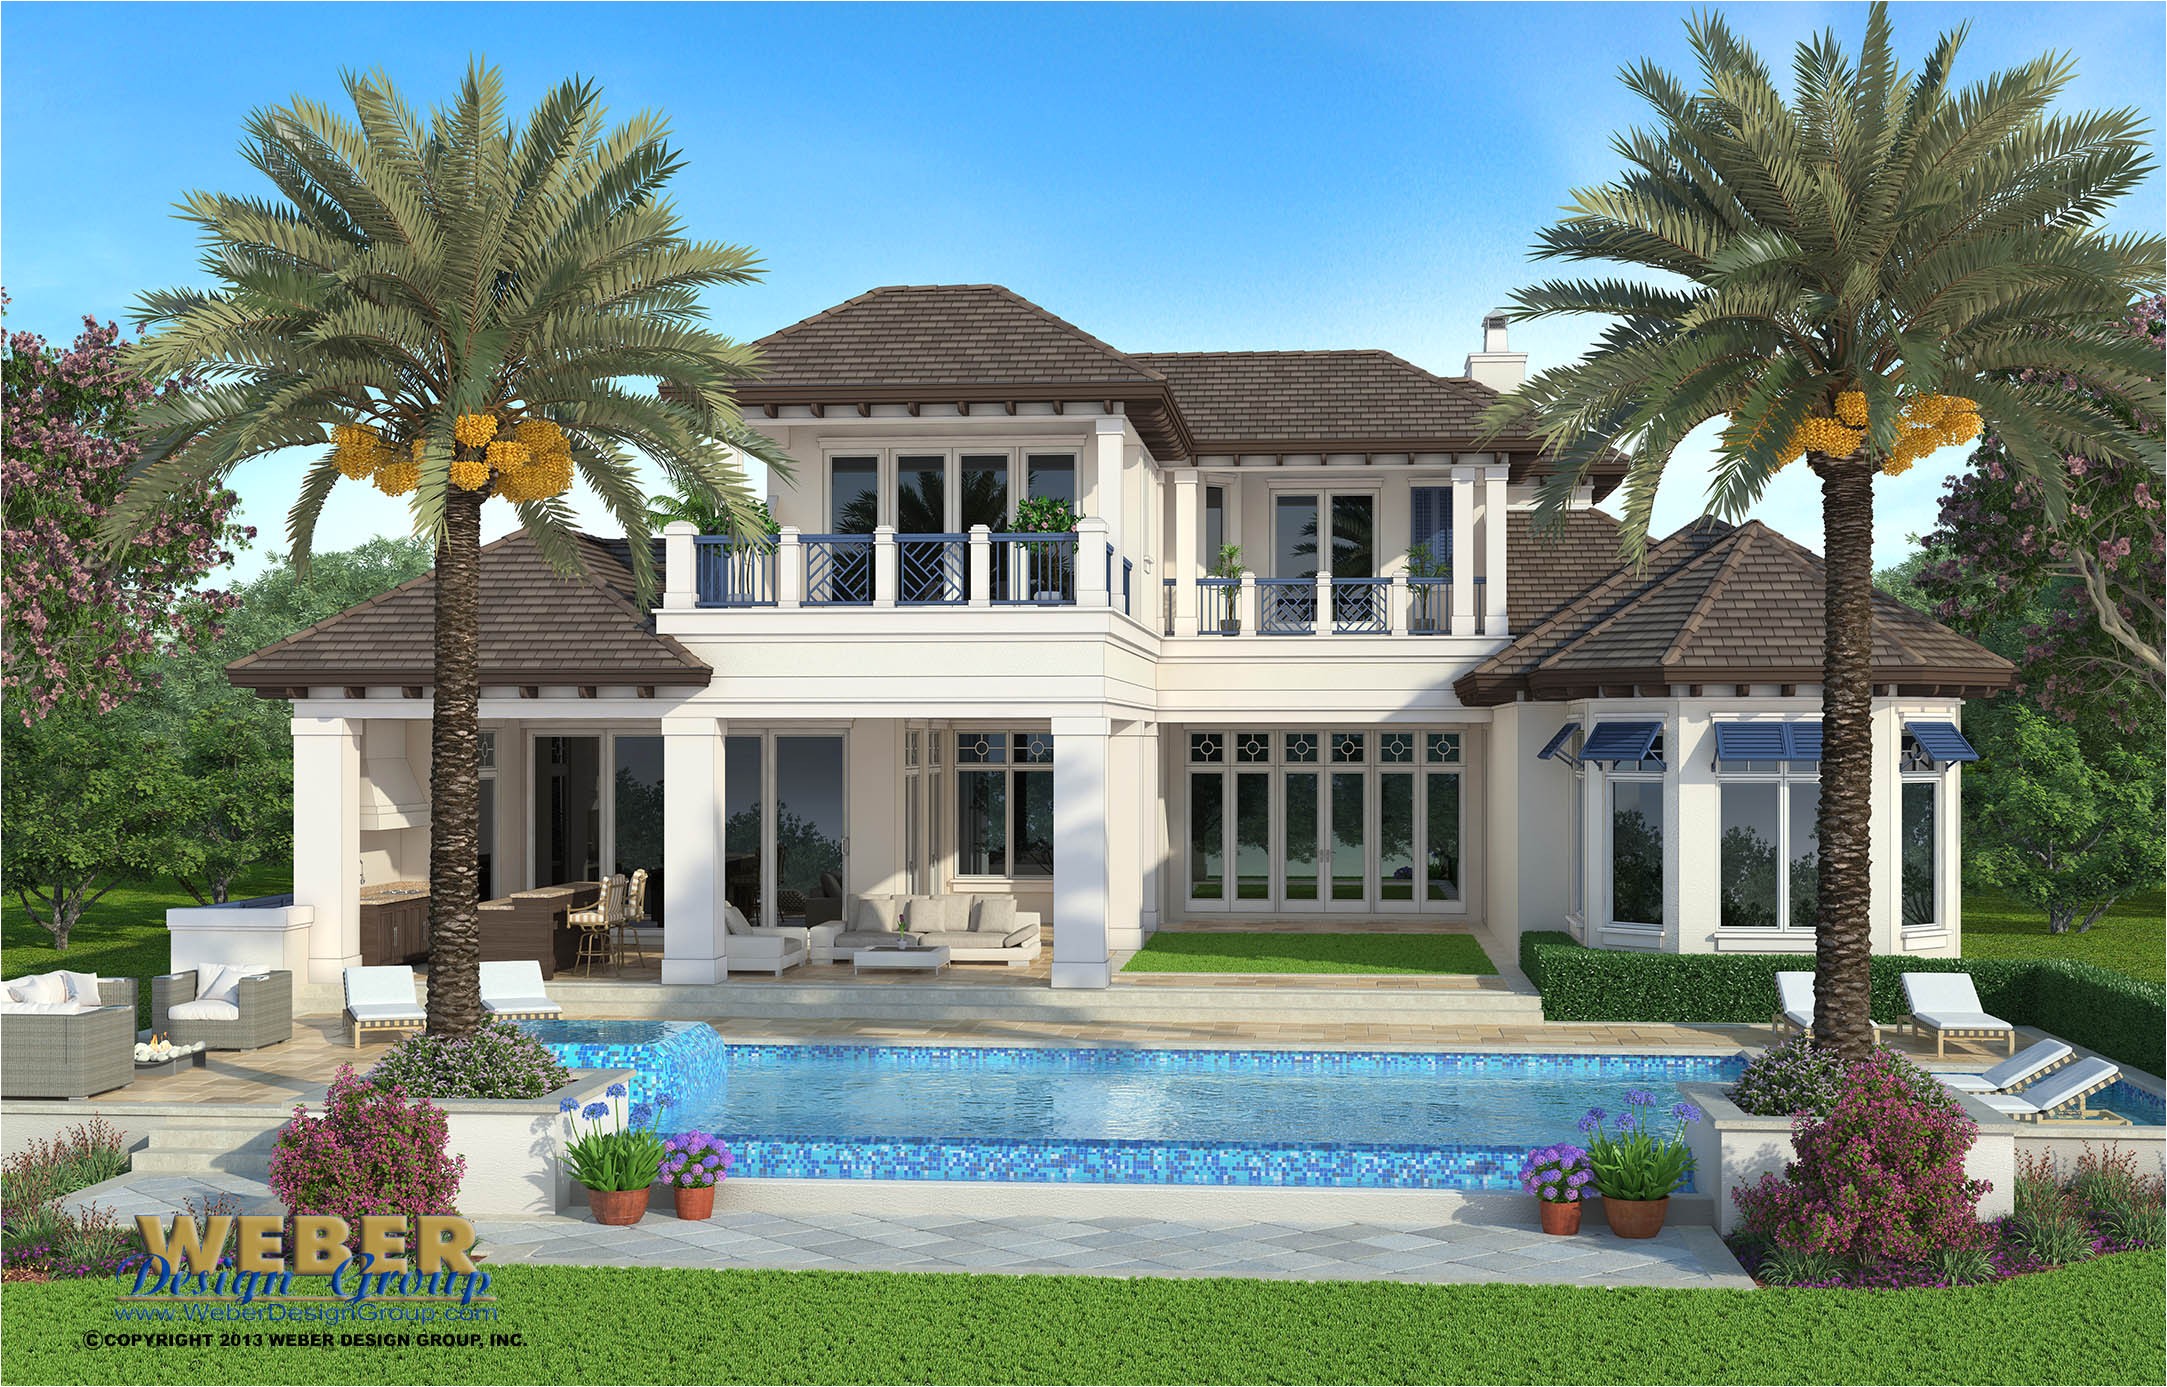 Florida Homes Plans Florida Designs Houses Home Design and Style